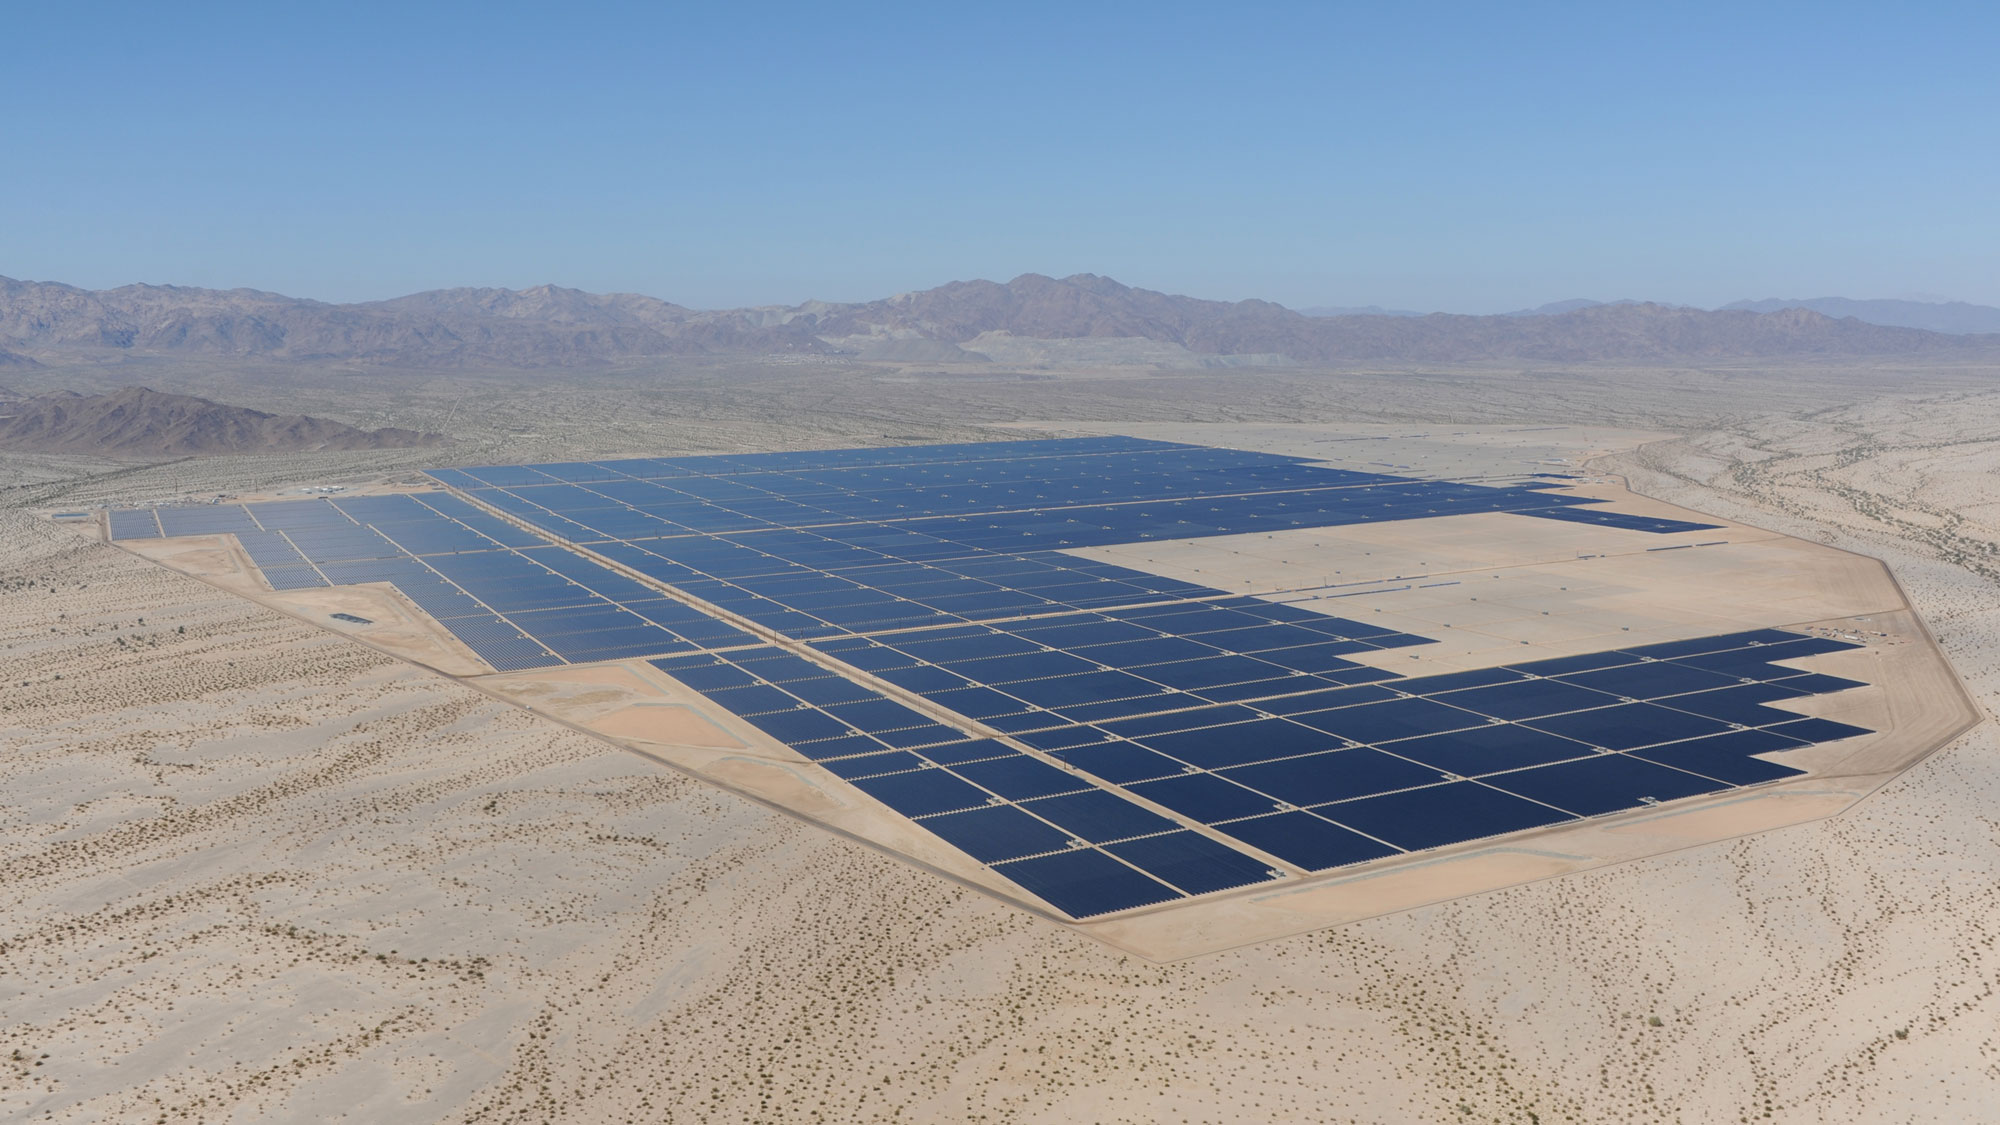 Aerial photograph of the Desert Sunlight Solar power plant in California. The photograph shows a series of black rectangles arrayed on a dry, relatively flat landscape. The rectangles are rows of solar panels seen from a distance. Mountains rise in the background.